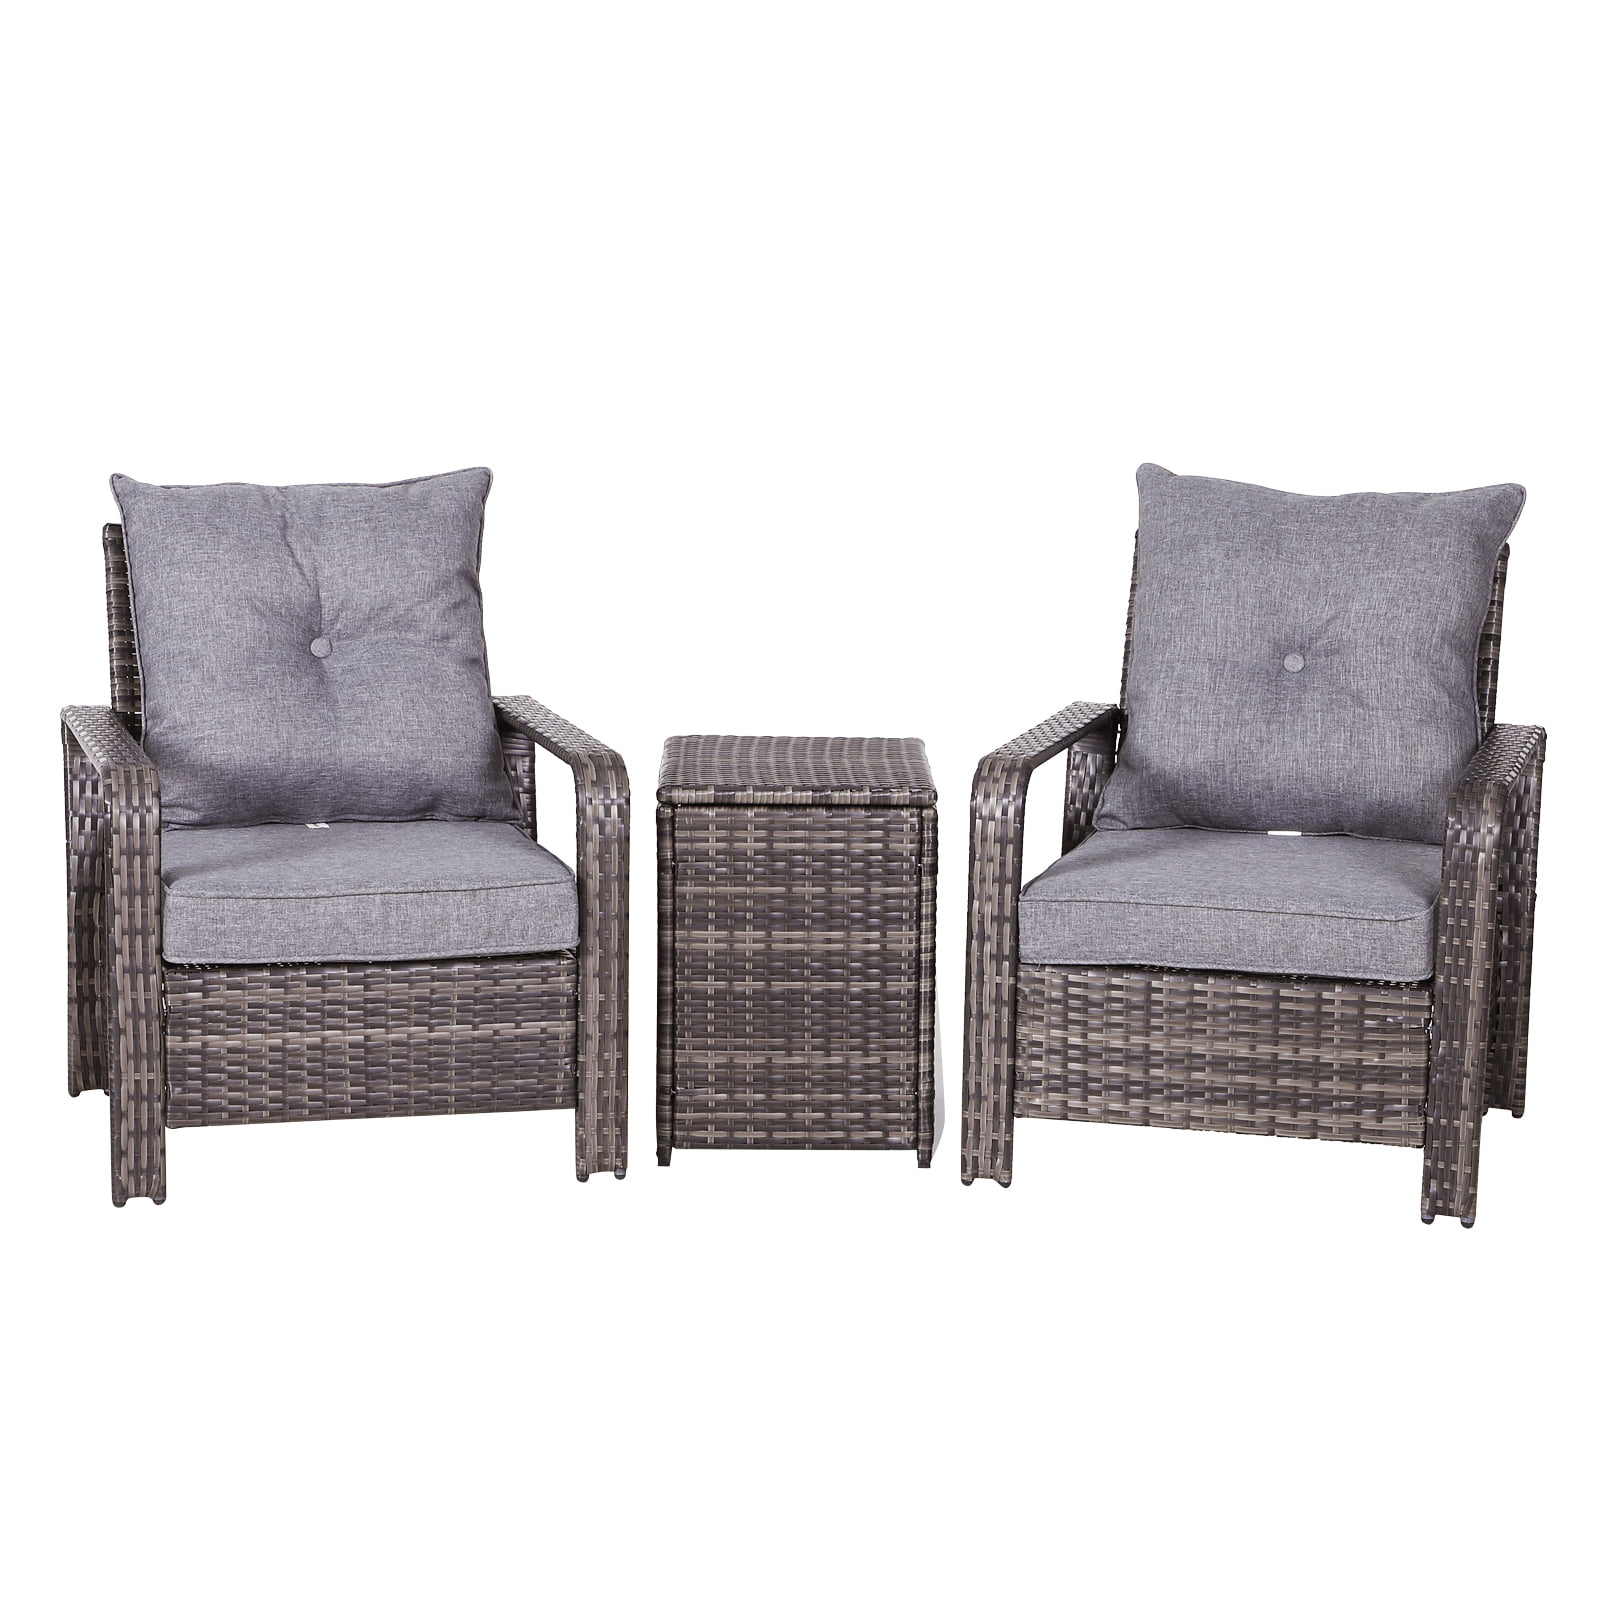 Outsunny 3 Piece PE Rattan Patio Chairs Porch Furniture Set with 2